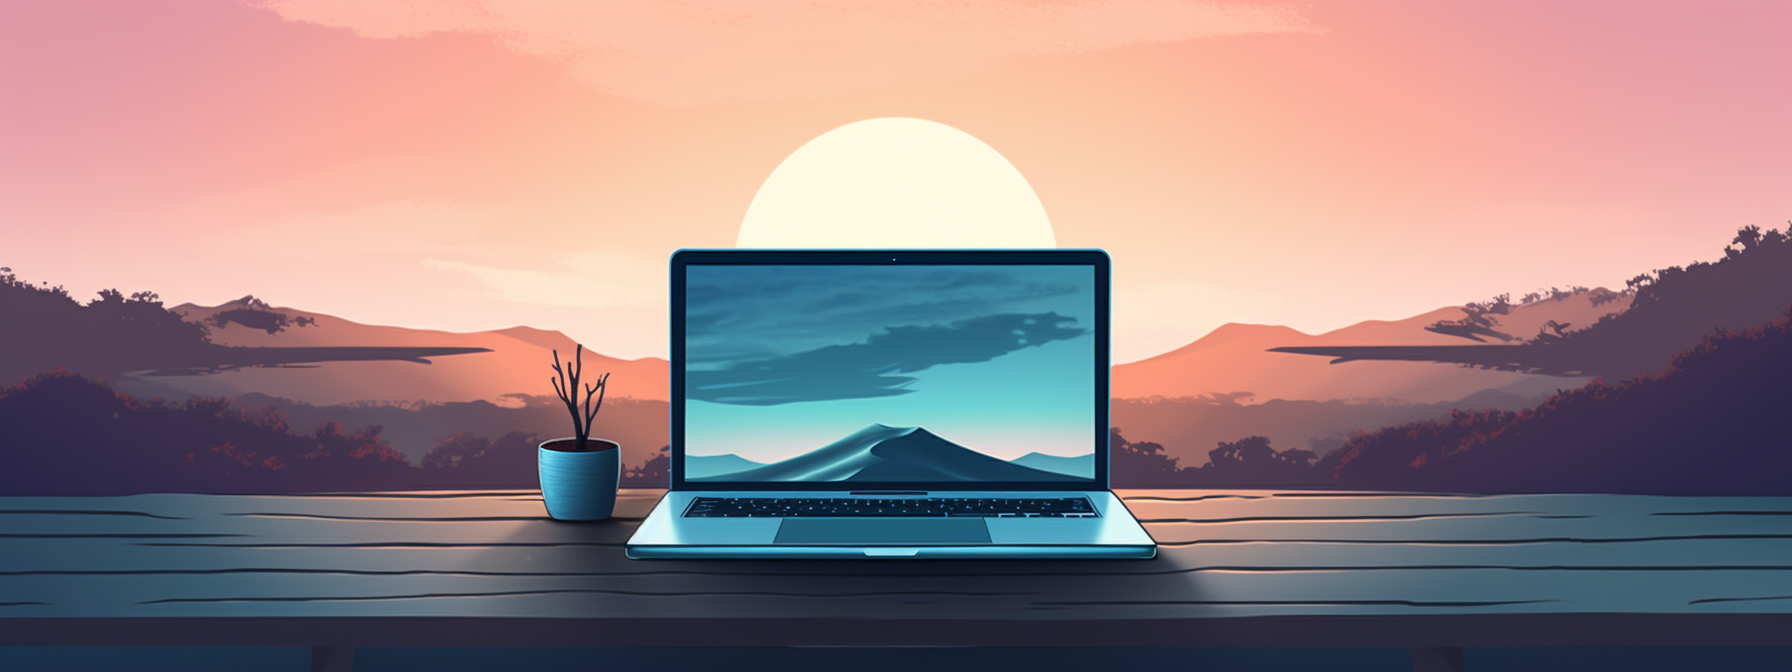 creatilou_graphic_of_a_sunrise_in_the_uk_a_laptop_sitting_in_th_bfb6db9b-670f-4ce4-8206-1ee5e5642bec